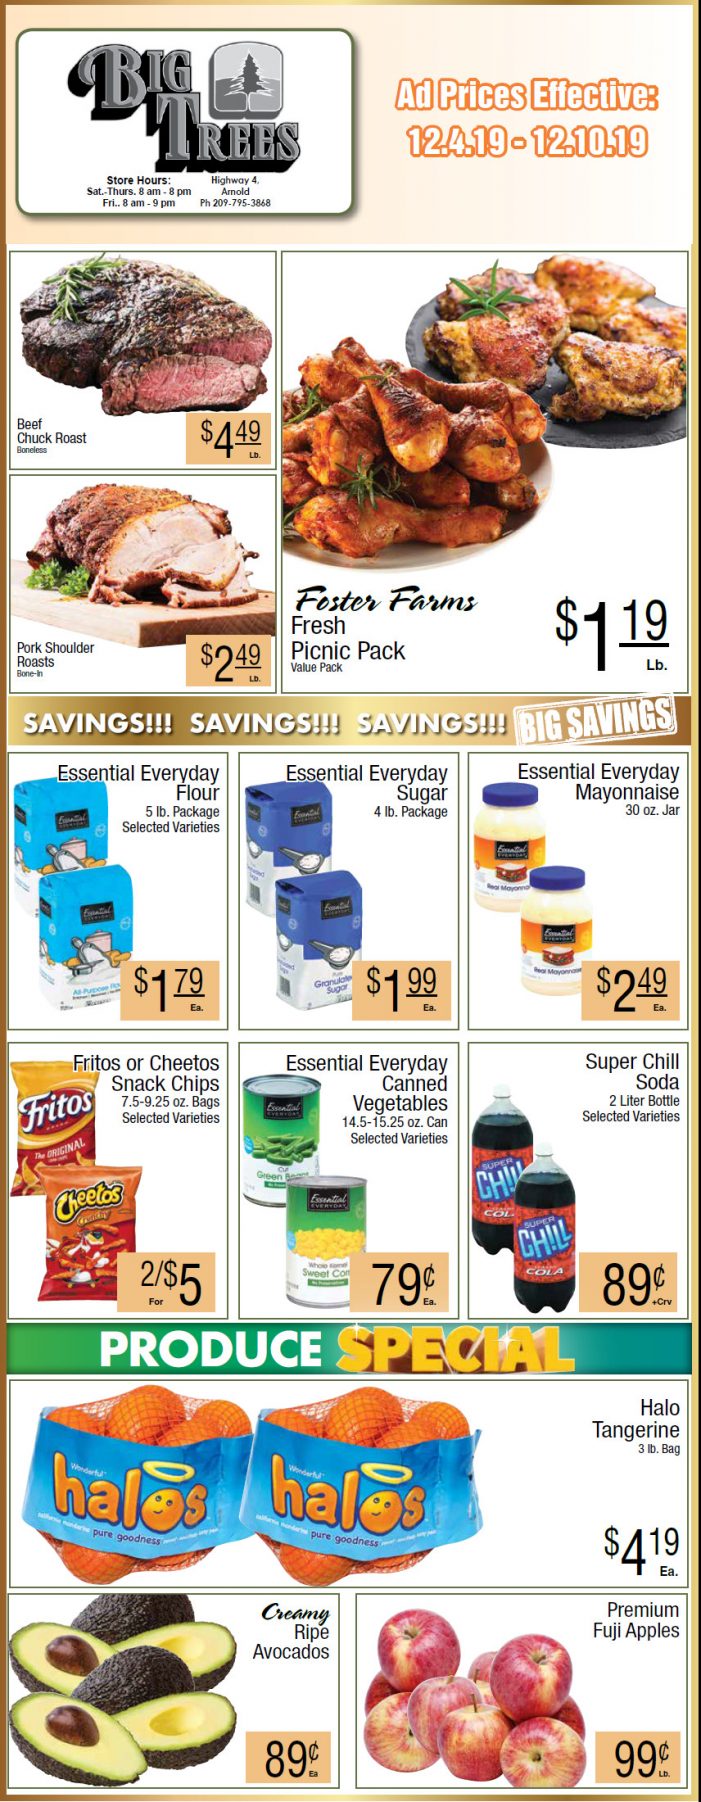 Big Trees Market Weekly Ad & Grocery Specials Through December 10th